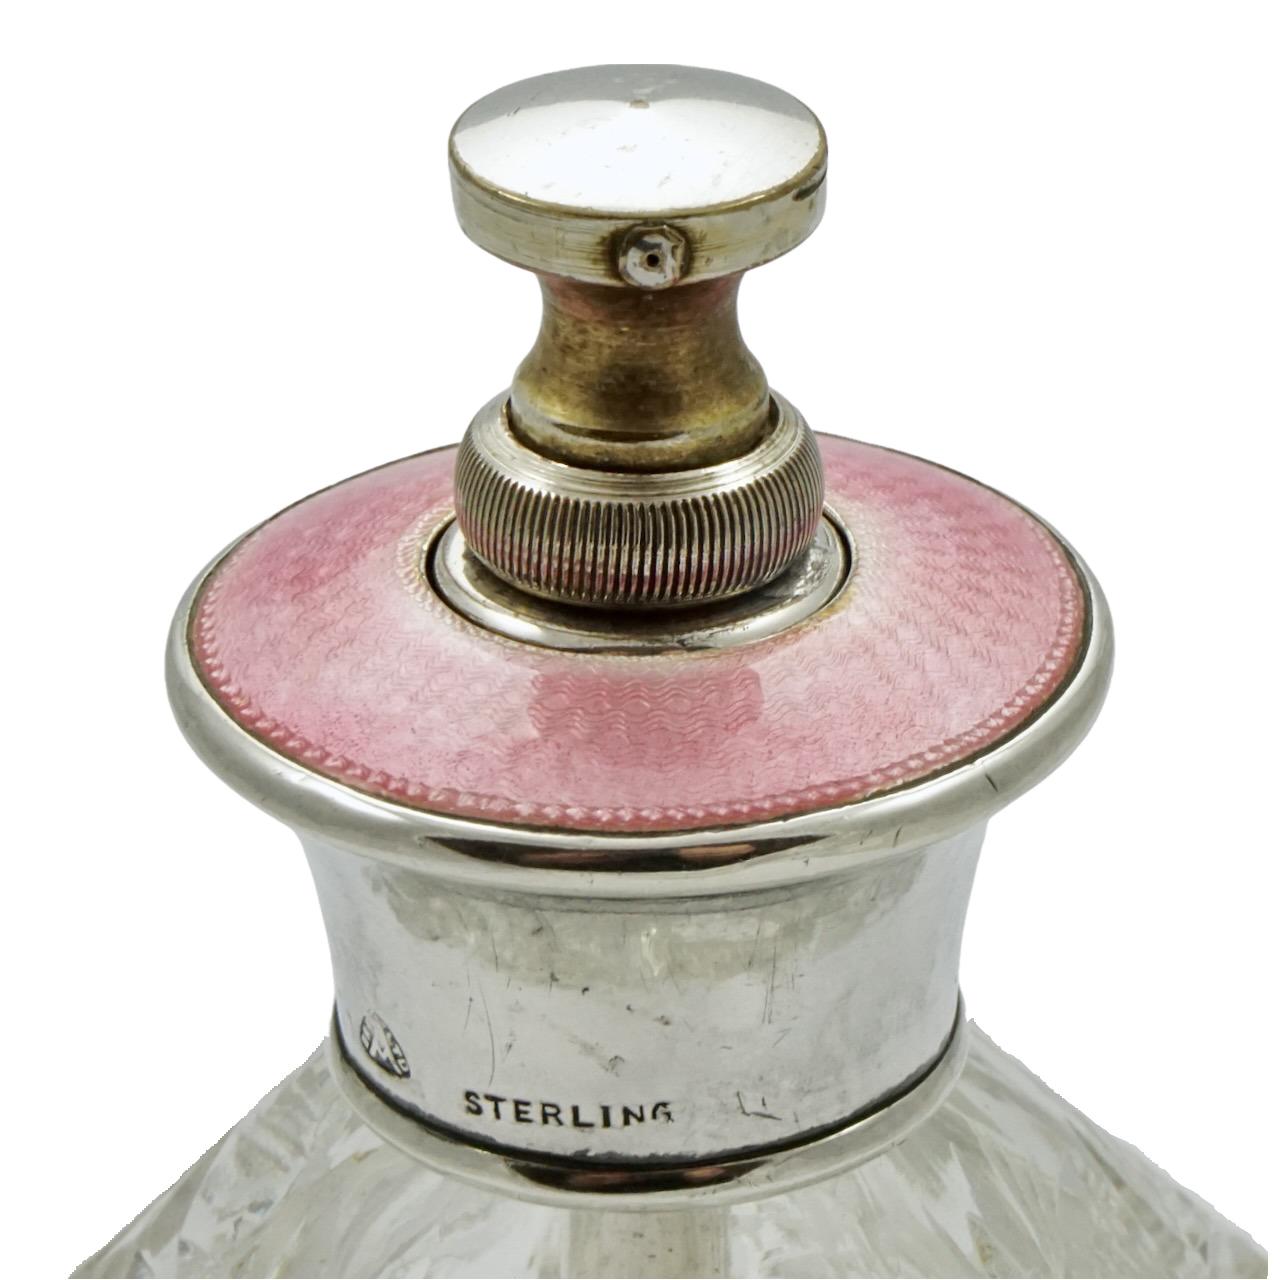 
Beautiful cut glass perfume bottle in a classic design featuring a sterling silver top decorated with pink guilloche enamel. The sprayer screws down when not in use. Measuring height 9 cm / 3.5 inches by diameter 7 cm / 2.75 inches. The perfume